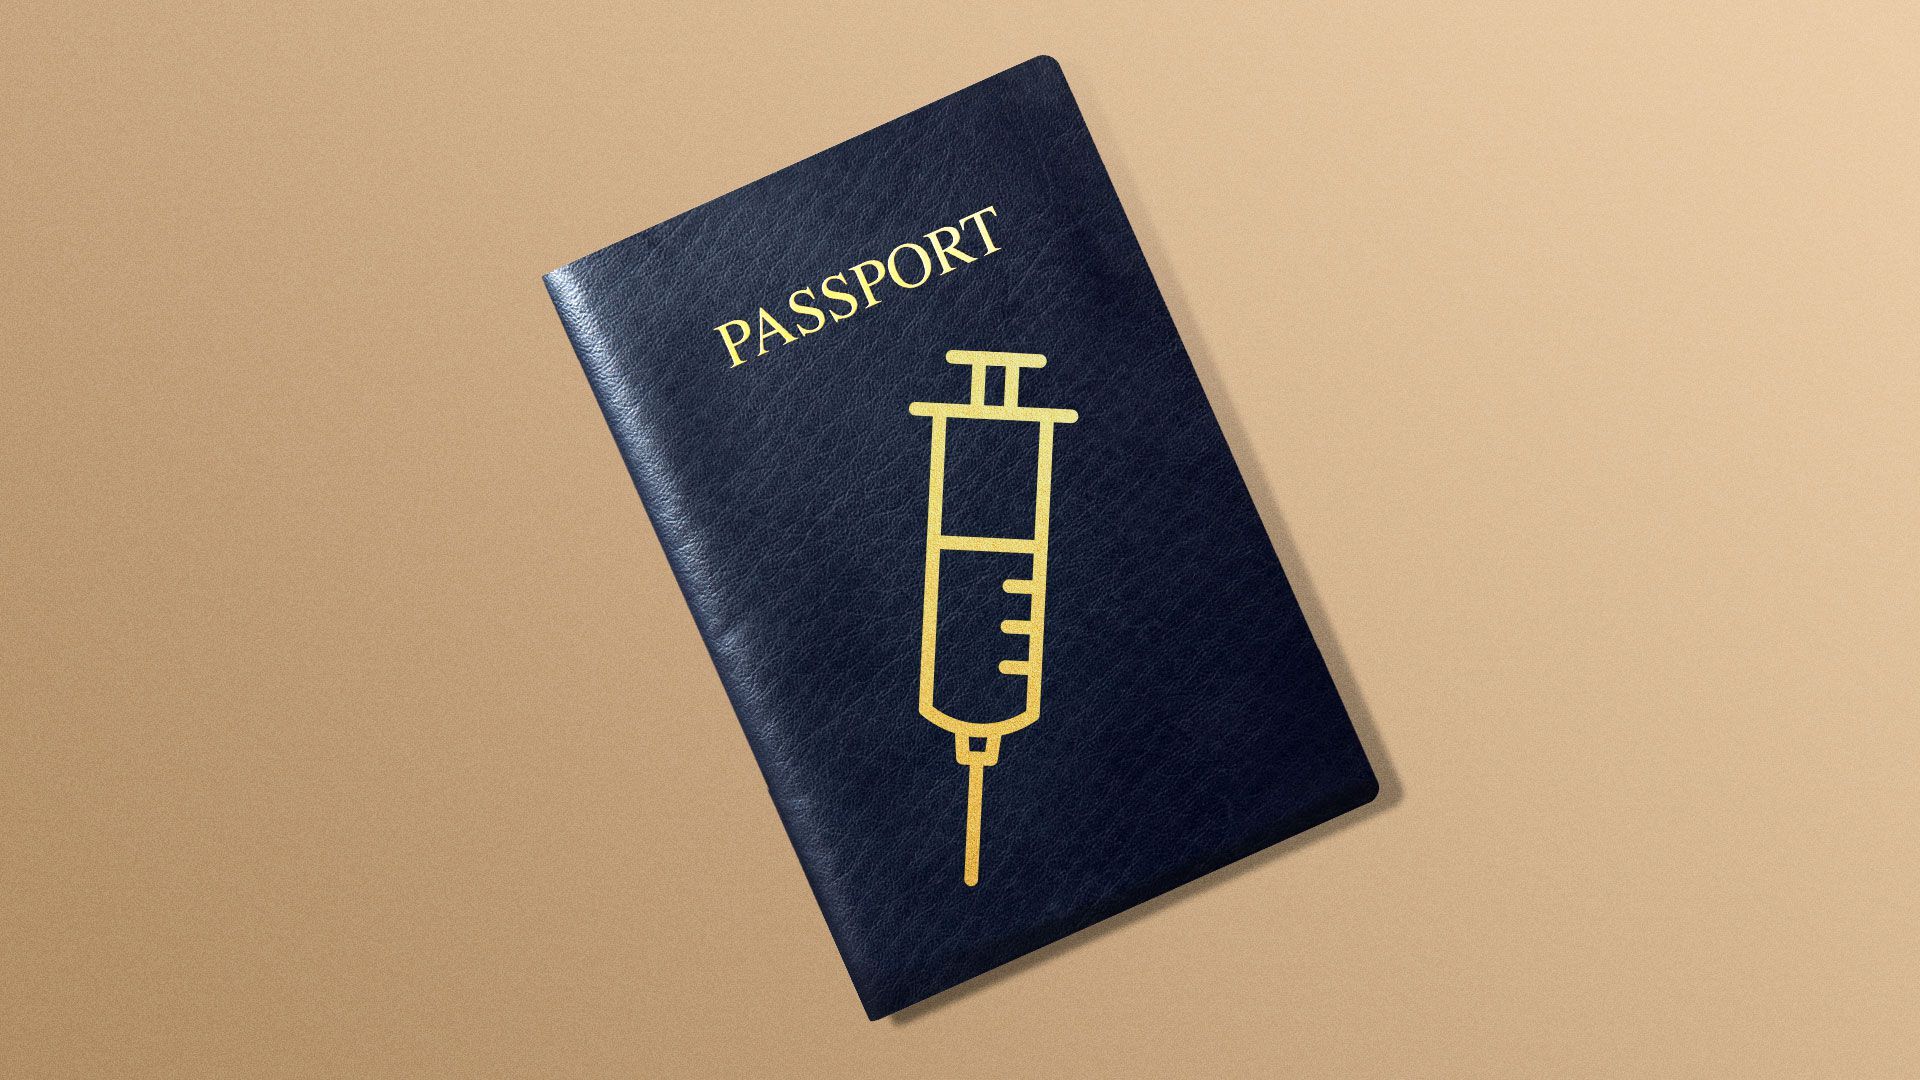 Illustration of a passport with a syringe on the cover.